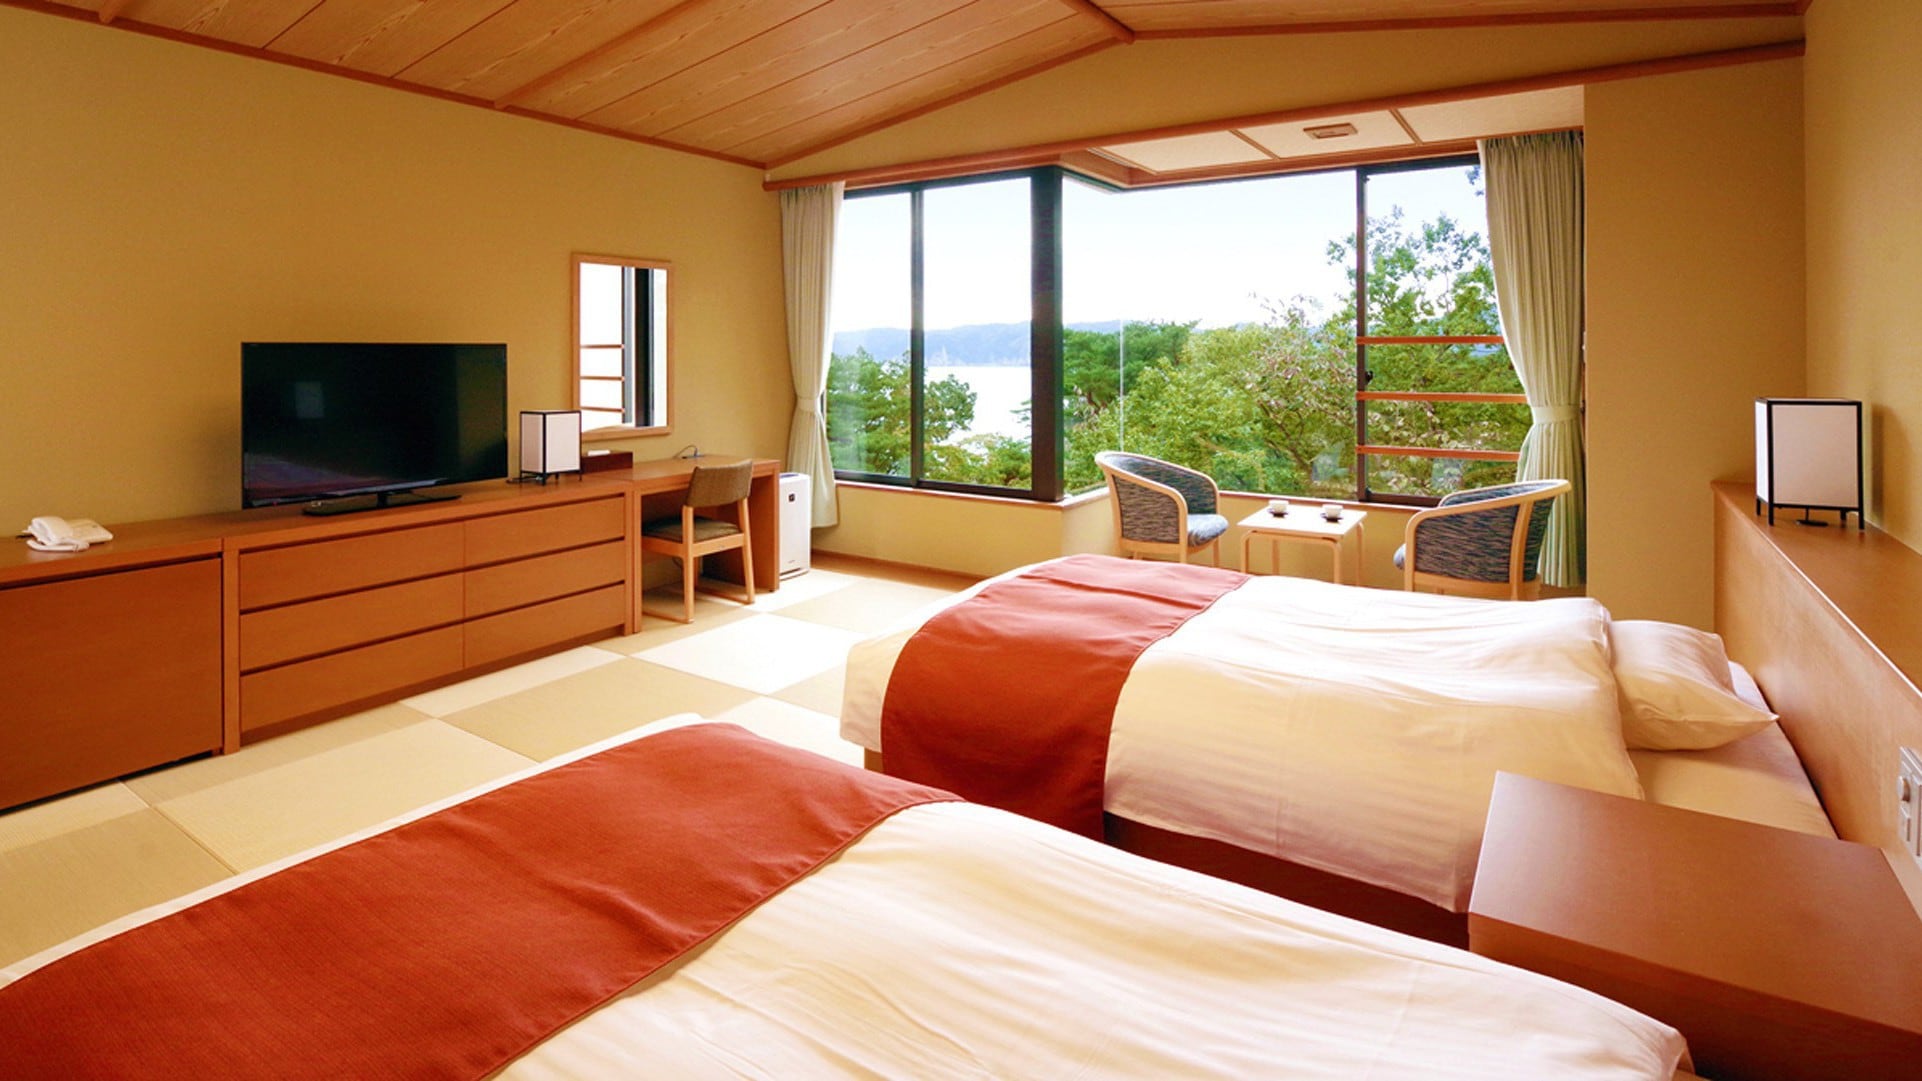 A spacious and elegant room. A relaxing atmosphere is attractive_Japanese-style bed